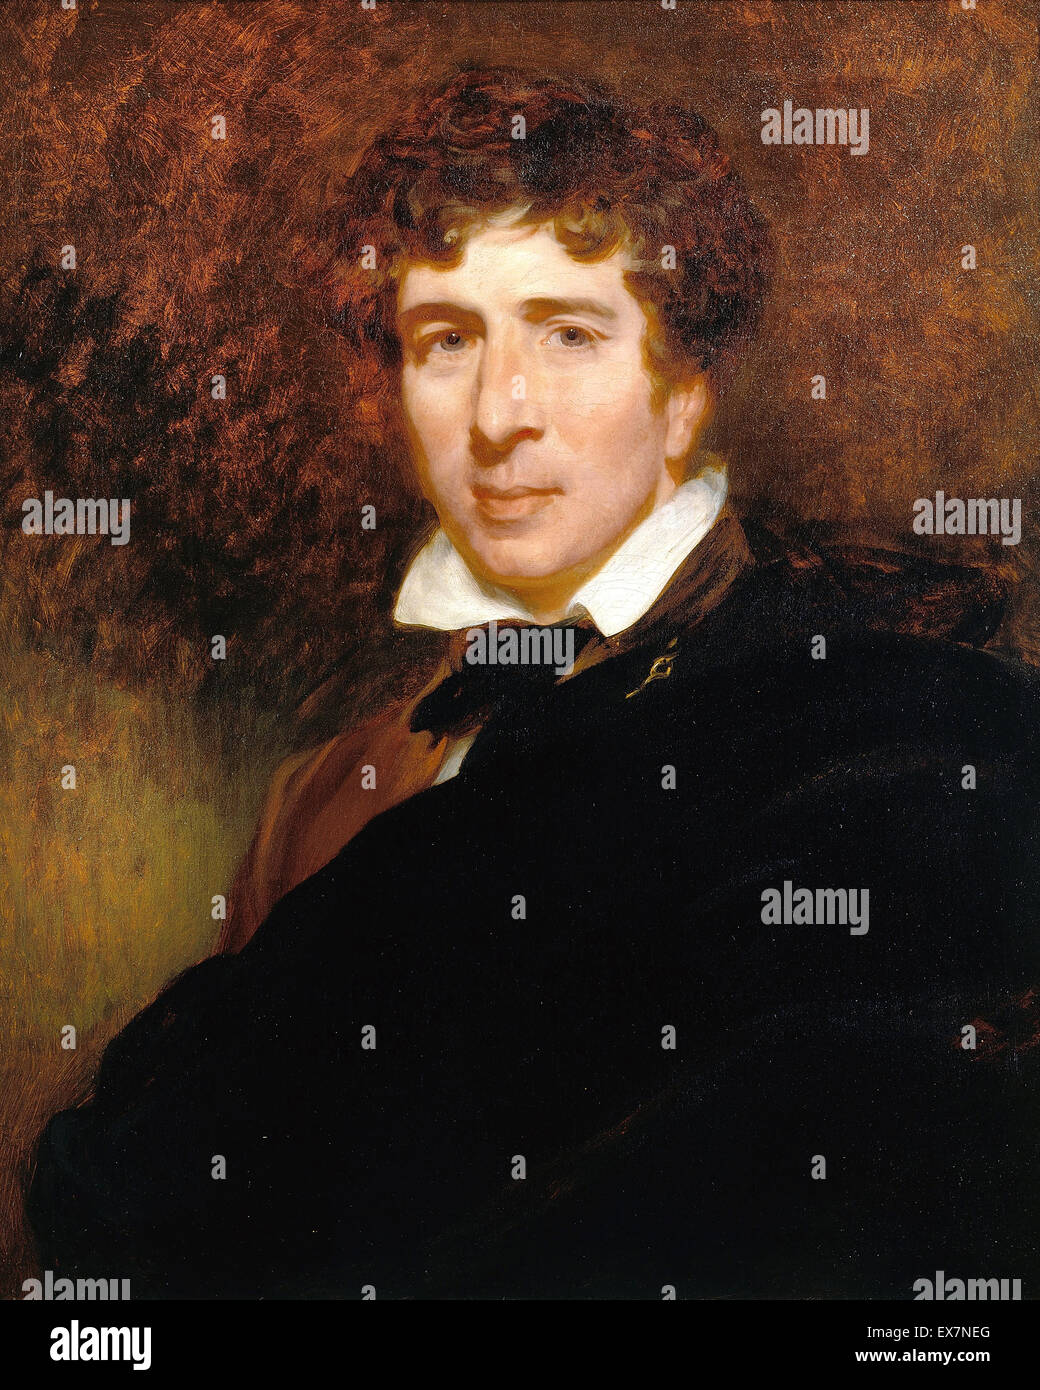 Henry Perronet Briggs, Charles Kemble. Circa 1832. Oil on canvas. Dulwich Picture Gallery, London, England. Stock Photo